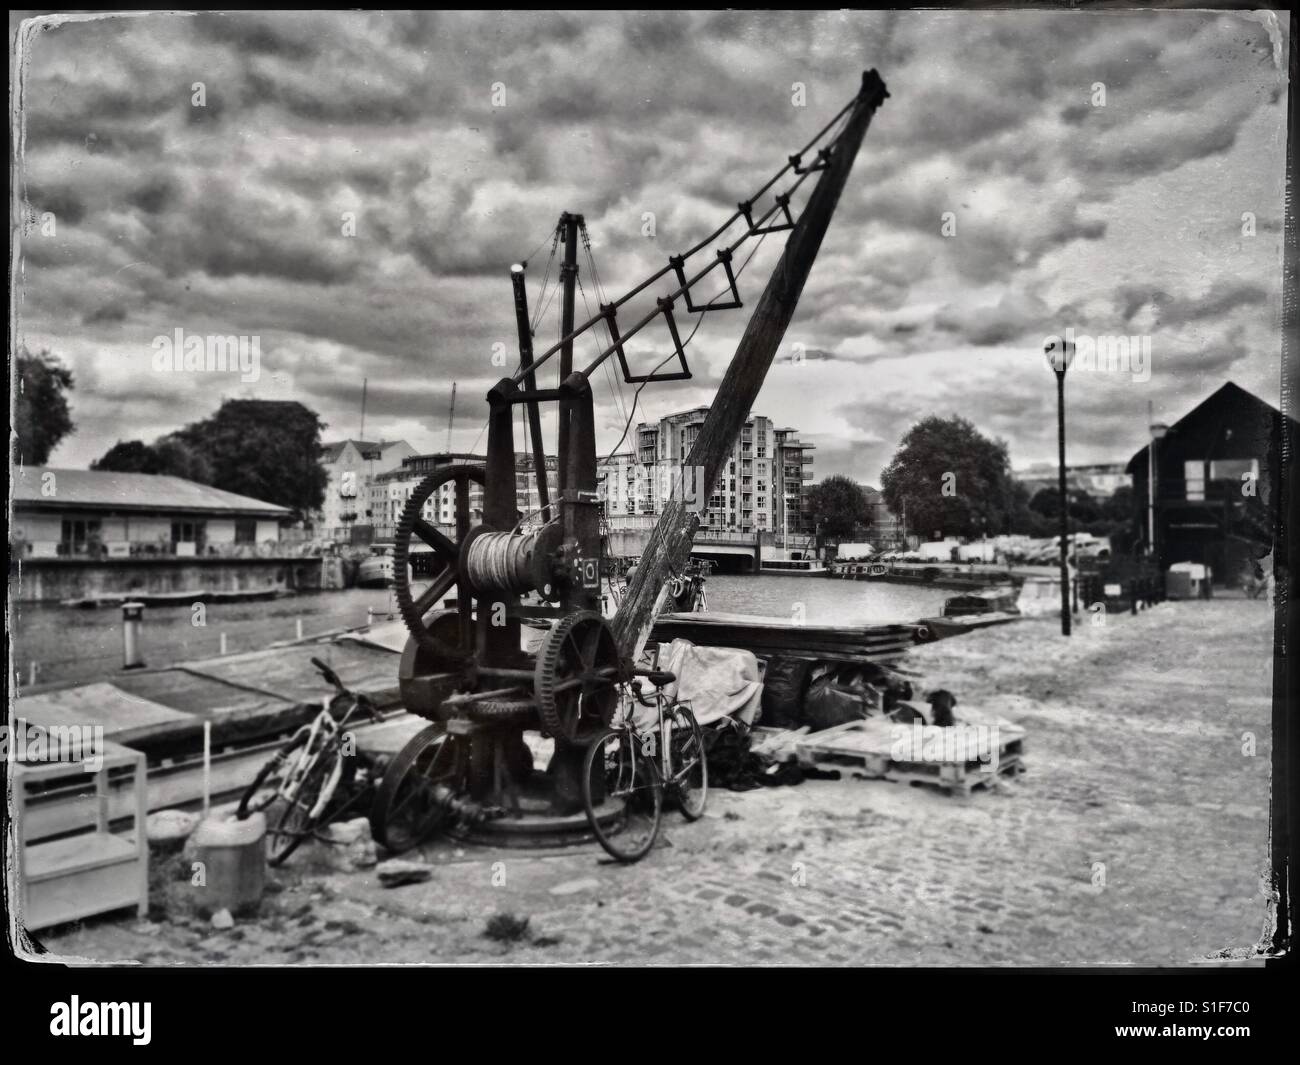 A simulated tintype photograph of a hand-operated wooden crane in the city docks in Bristol, UK Stock Photo